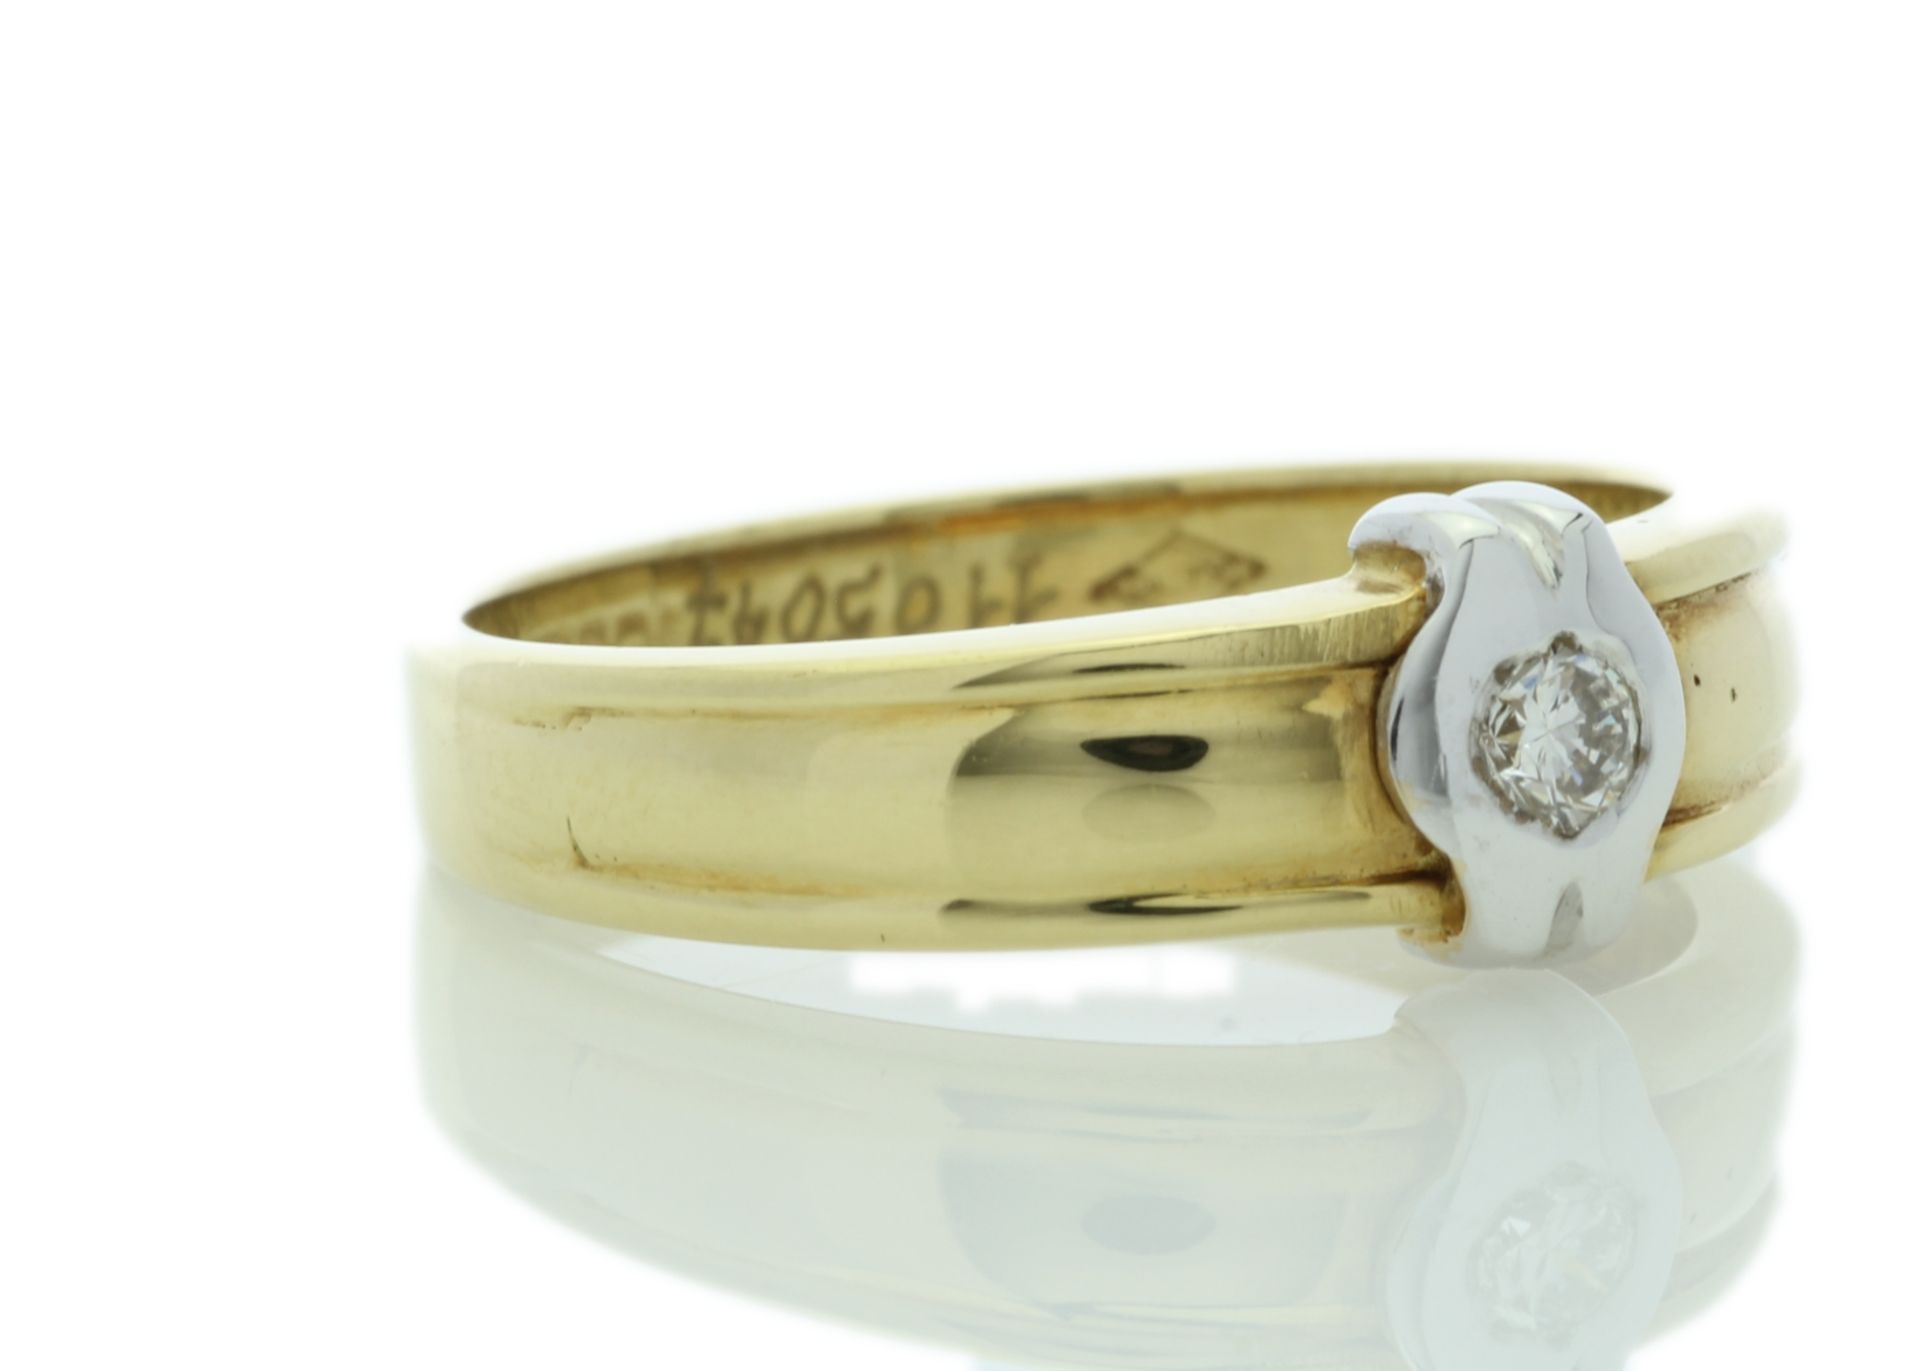 18ct Yellow Gold Single Stone Fancy Rub Over Set Diamond Ring 0.21 Carats - Valued by GIE £9,500. - Image 4 of 5